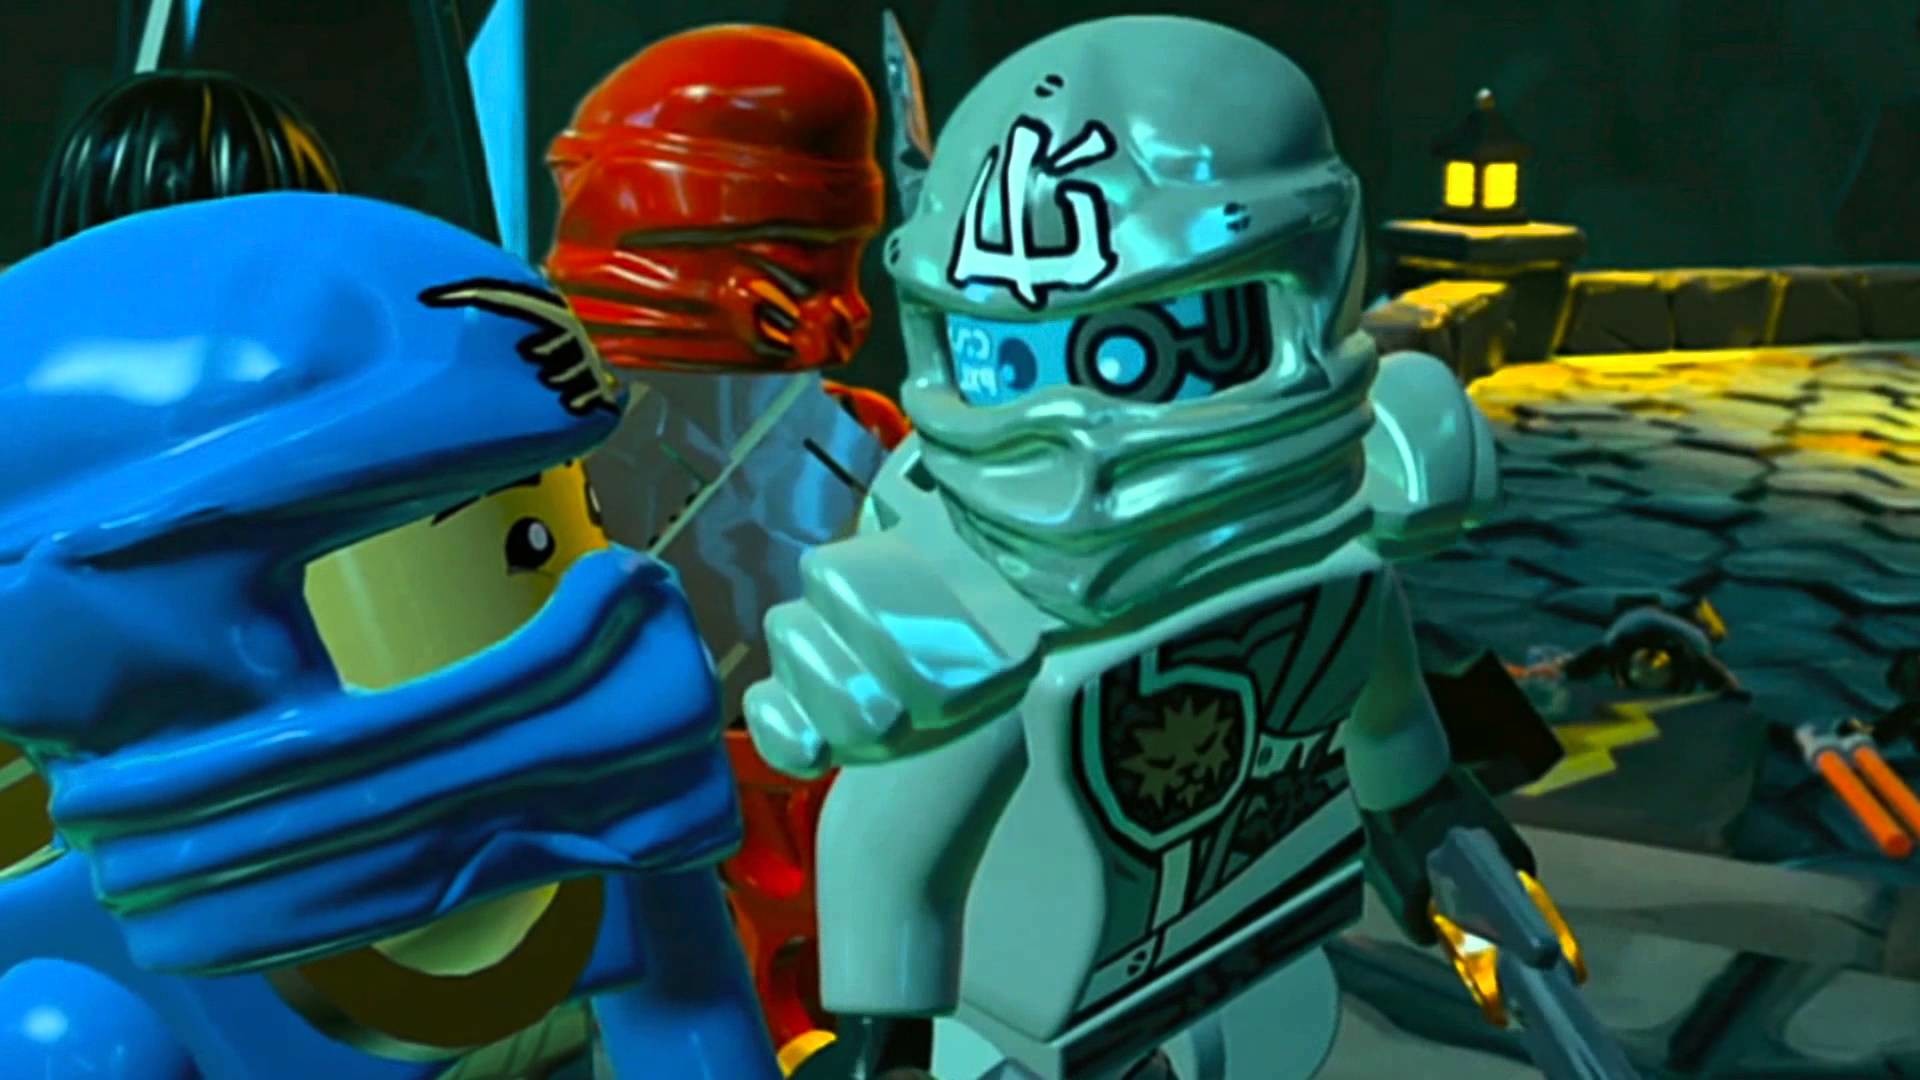 1920x1080 LEGO NINJAGO: SHADOW OF RONIN NOW AVAILABLE ON iPHONE, iPAD and iPOD TOUCH